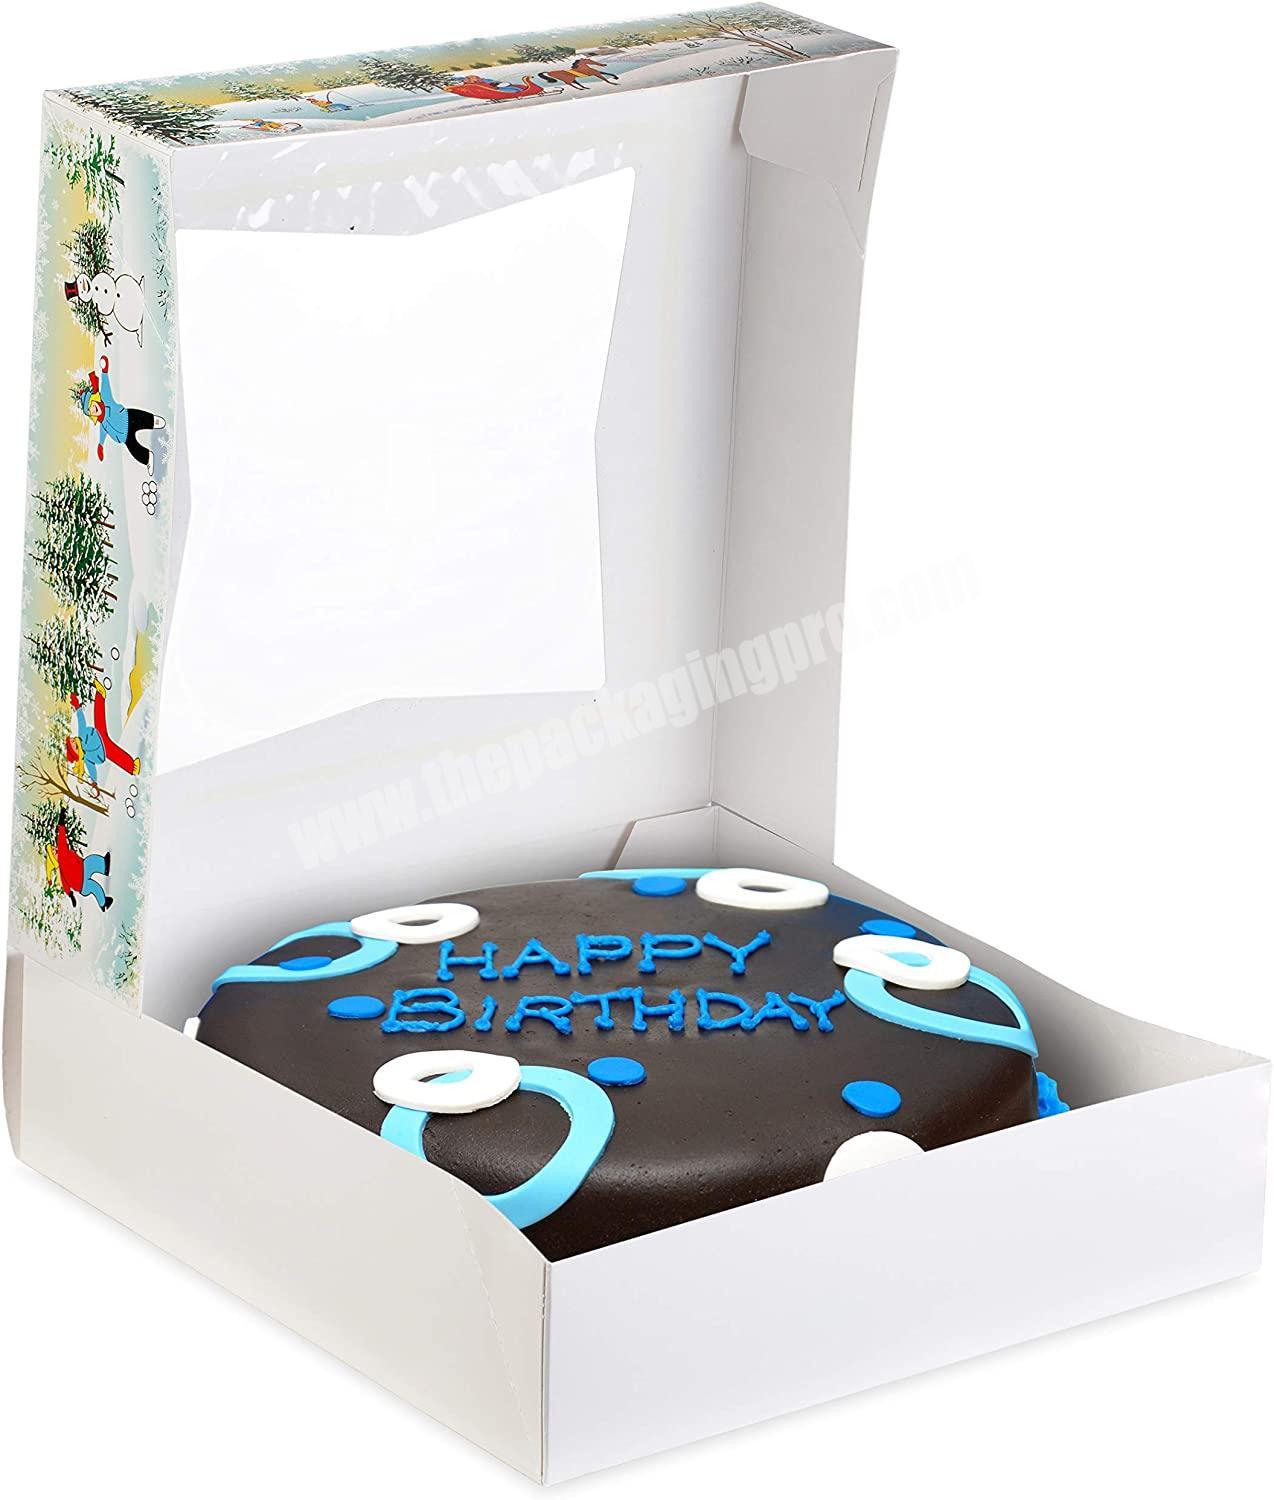 Custom Printed Paper Bakery Mini Muffin Cupcake Boxes 6 holes with Window Pastry Cake Packaging Boxes in Auto Pop up Style